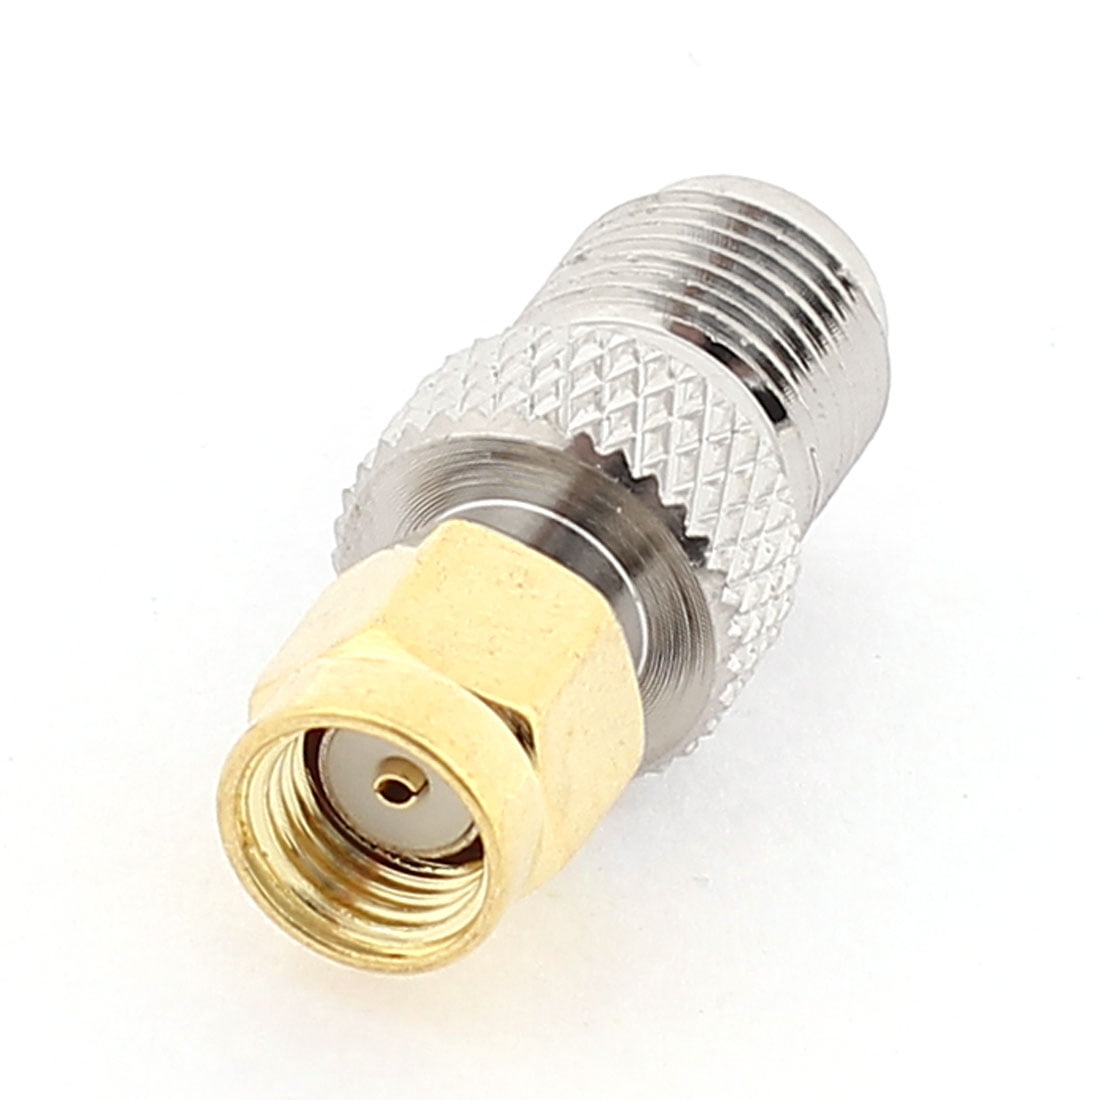 NEW RP-SMA Male to SMA Female Jack Straight RF Antenna Connector Adapter w/o Pin 